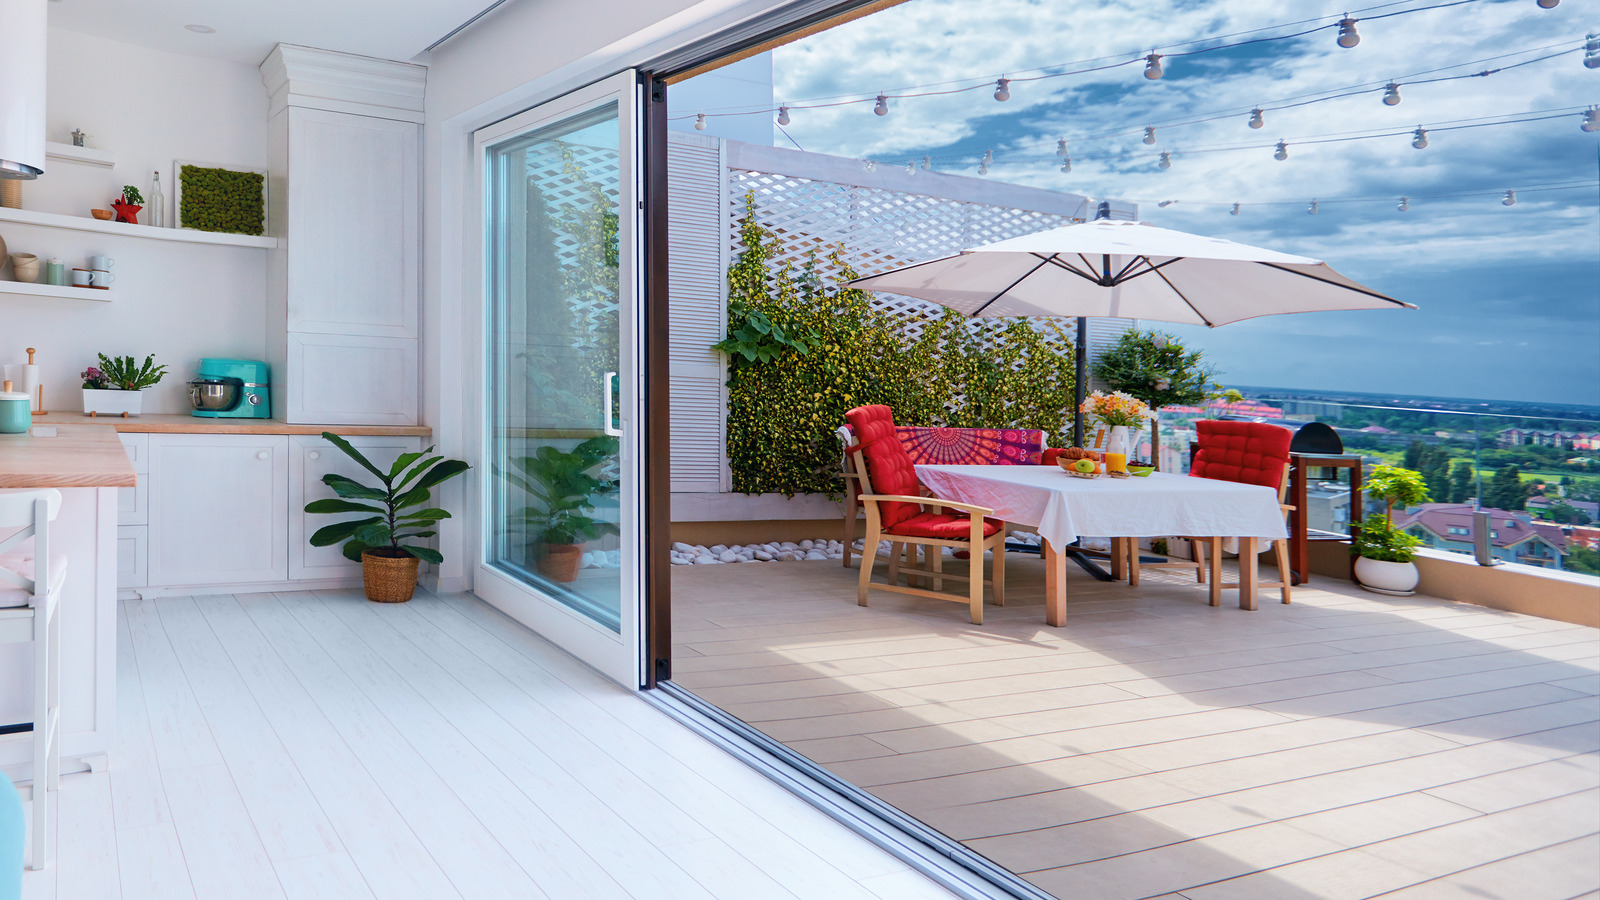 https://www.housedigest.com/img/gallery/the-best-way-to-clean-gunk-out-of-your-sliding-door-tracks/l-intro-1685762790.jpg